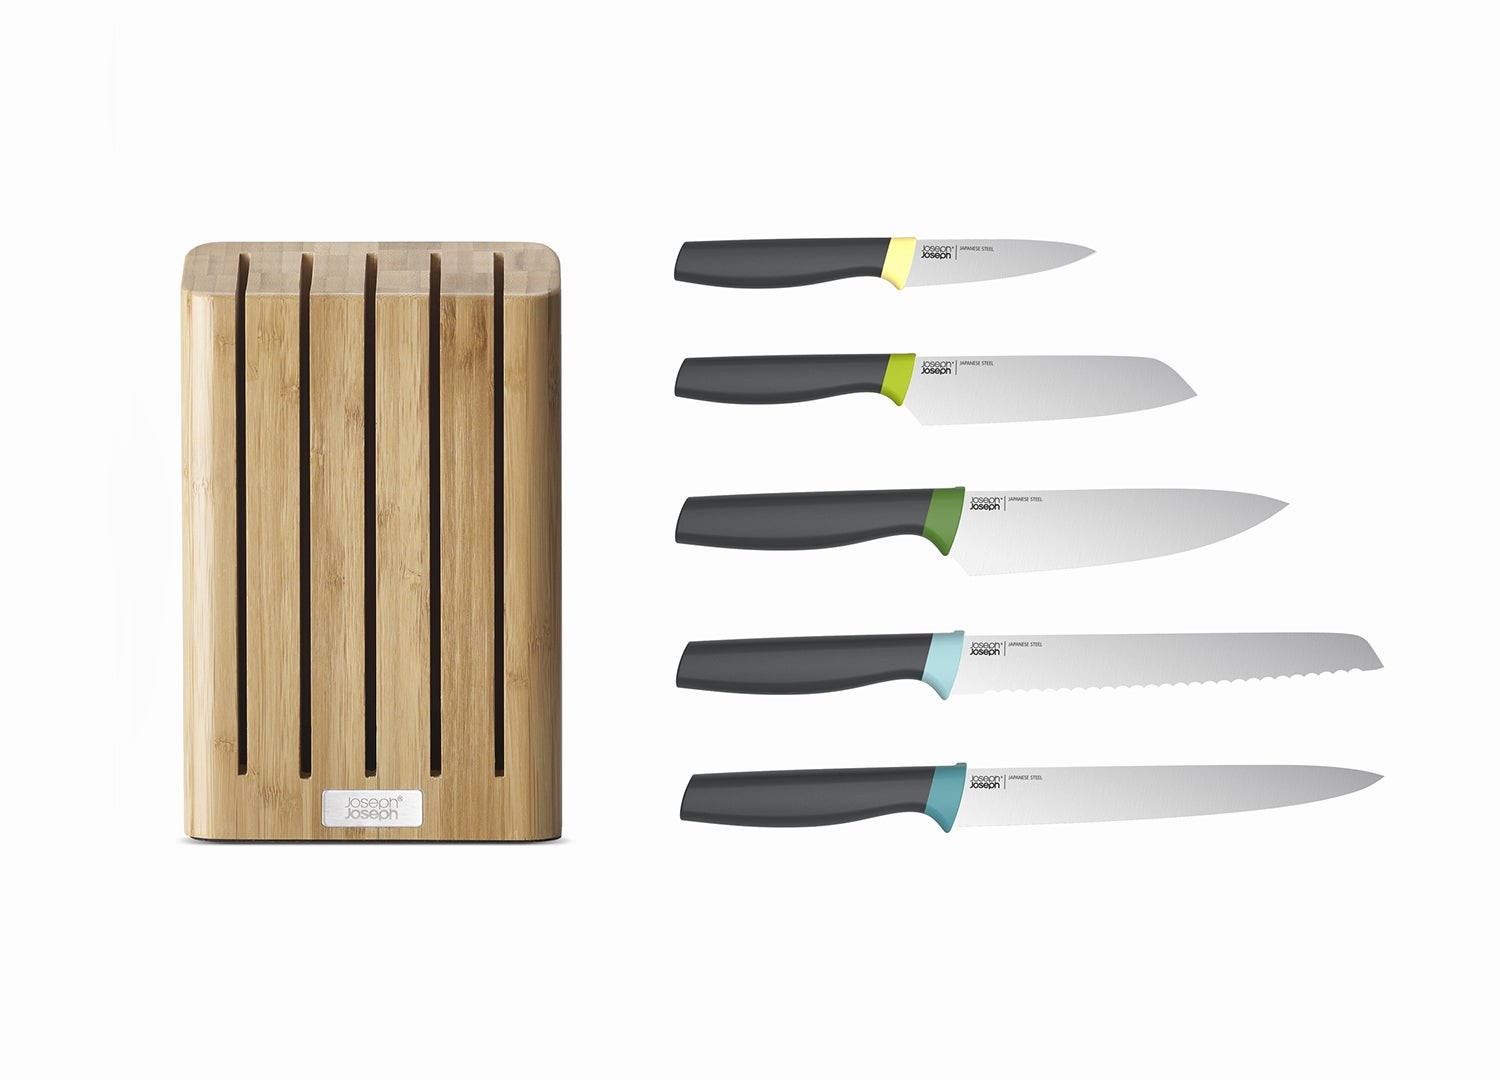 Elevate 6pc Compact Bamboo Knife Block Set